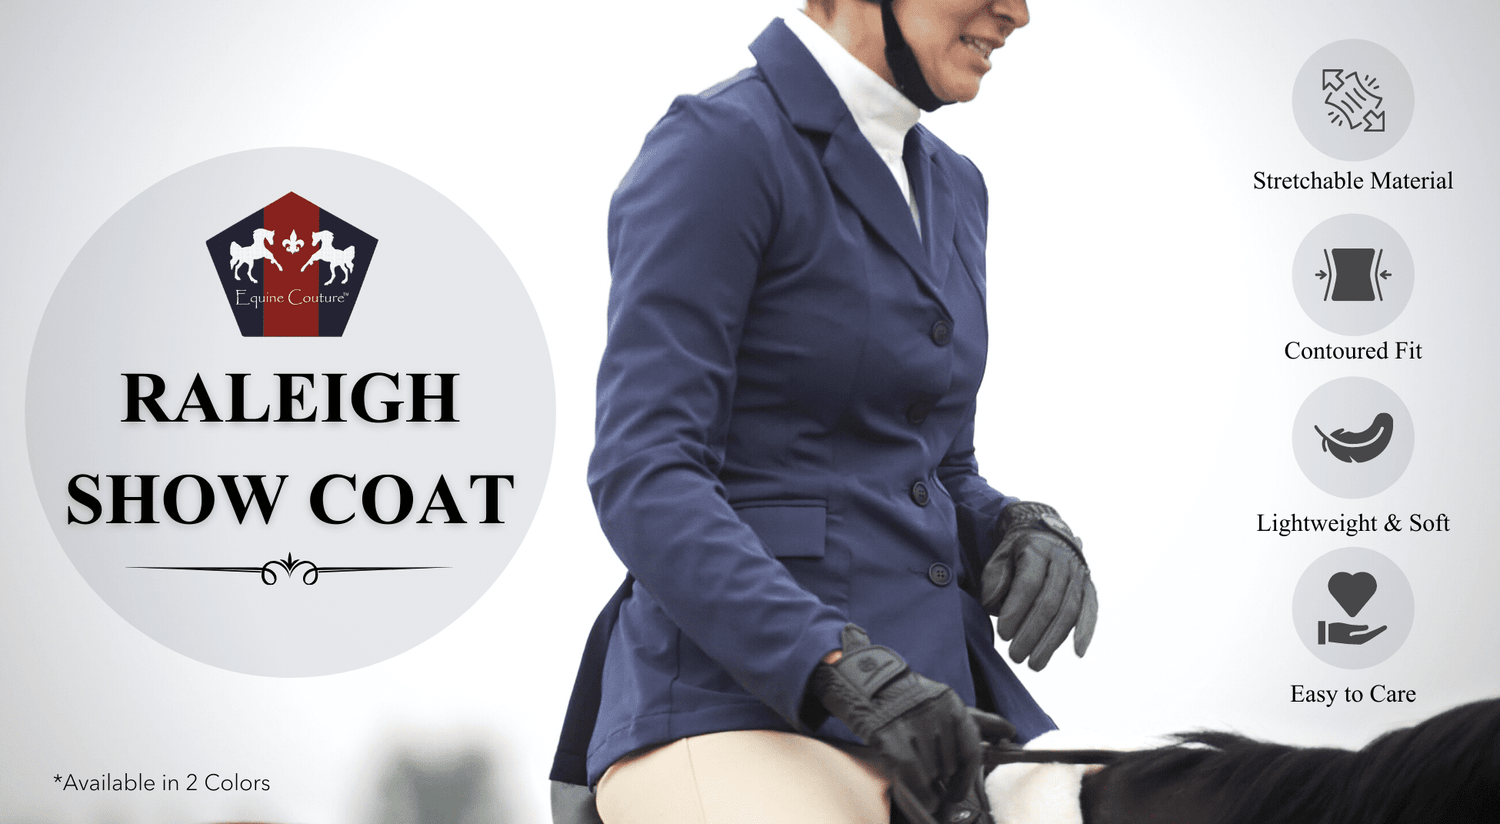 Equine Couture Ladies Raleigh Show Coat - Breeches.com